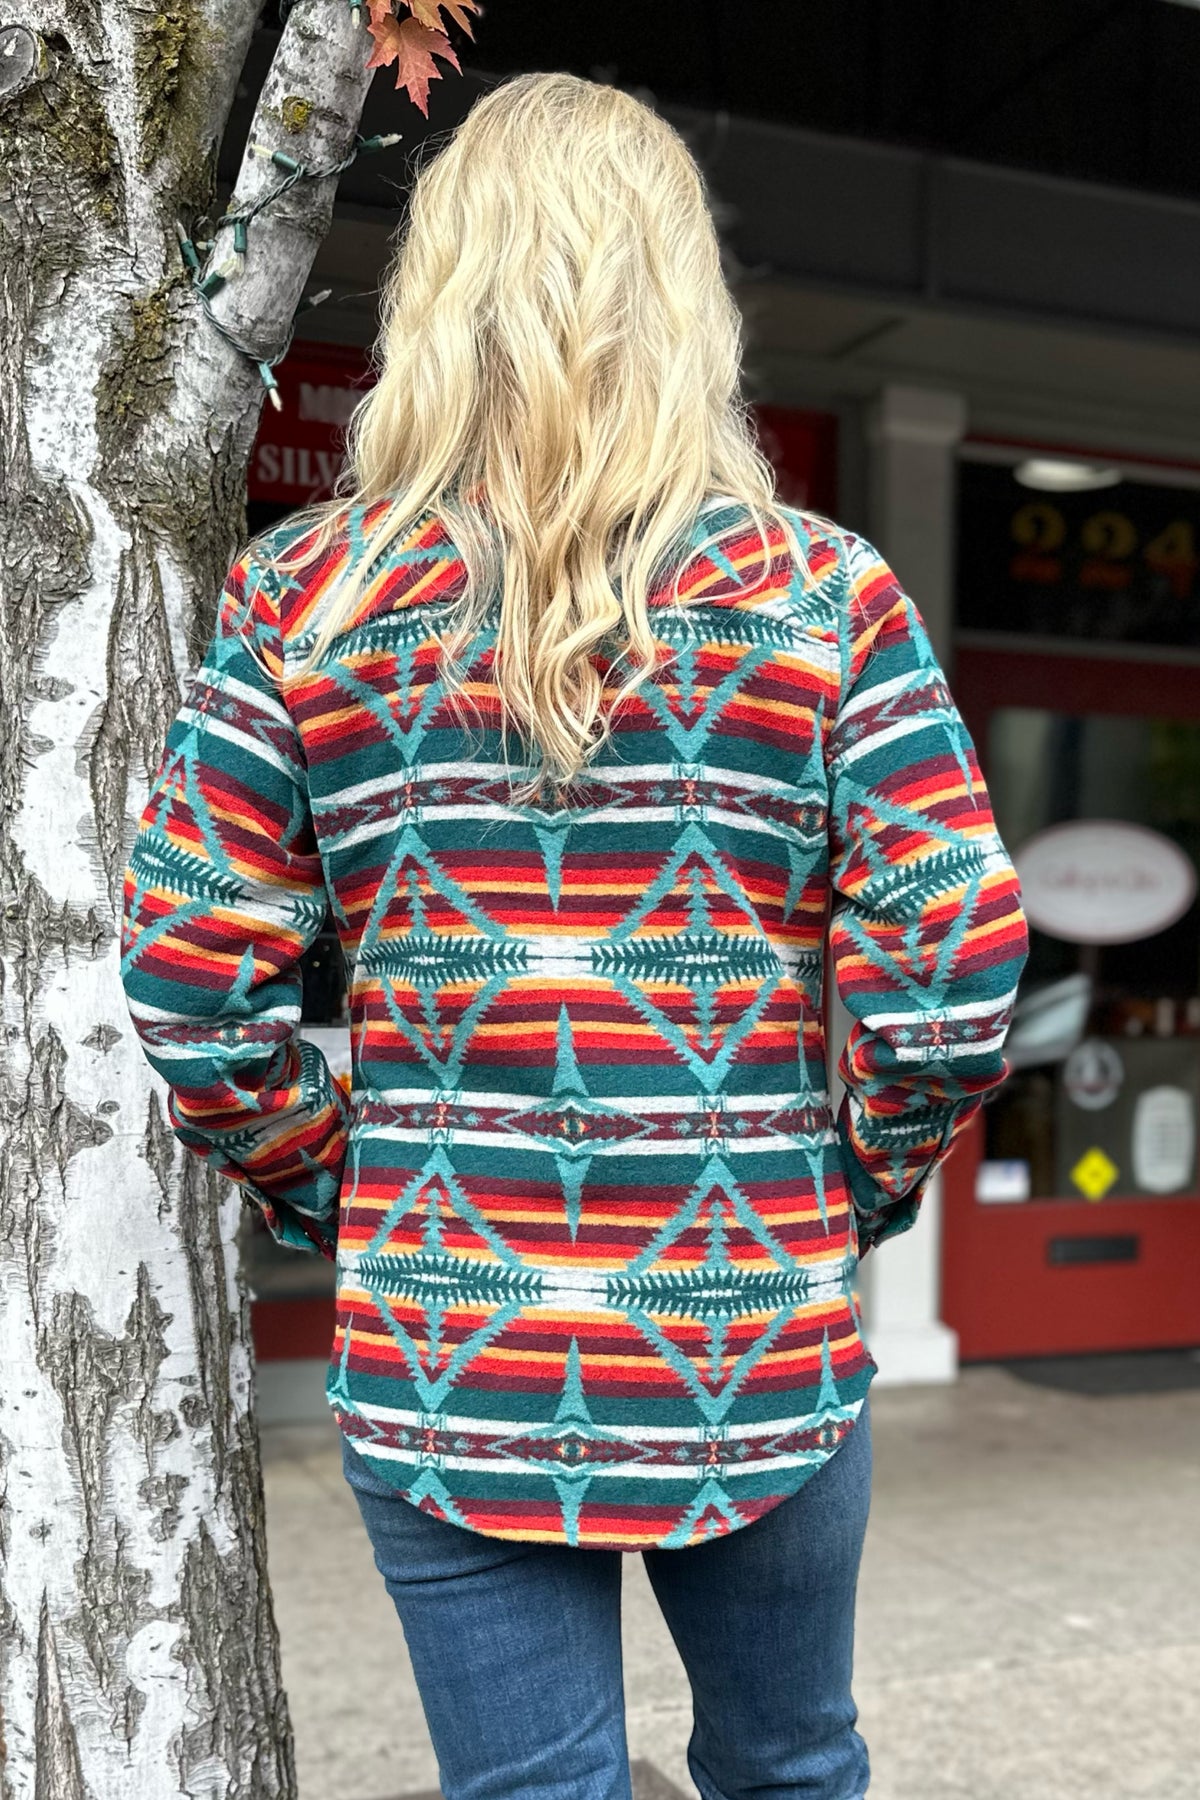 Women's Teal Aztec Jacquard Wool-Blend Shirt Jacket by Powder River-Shacket-Powder River Outfitters-Gallop 'n Glitz- Women's Western Wear Boutique, Located in Grants Pass, Oregon